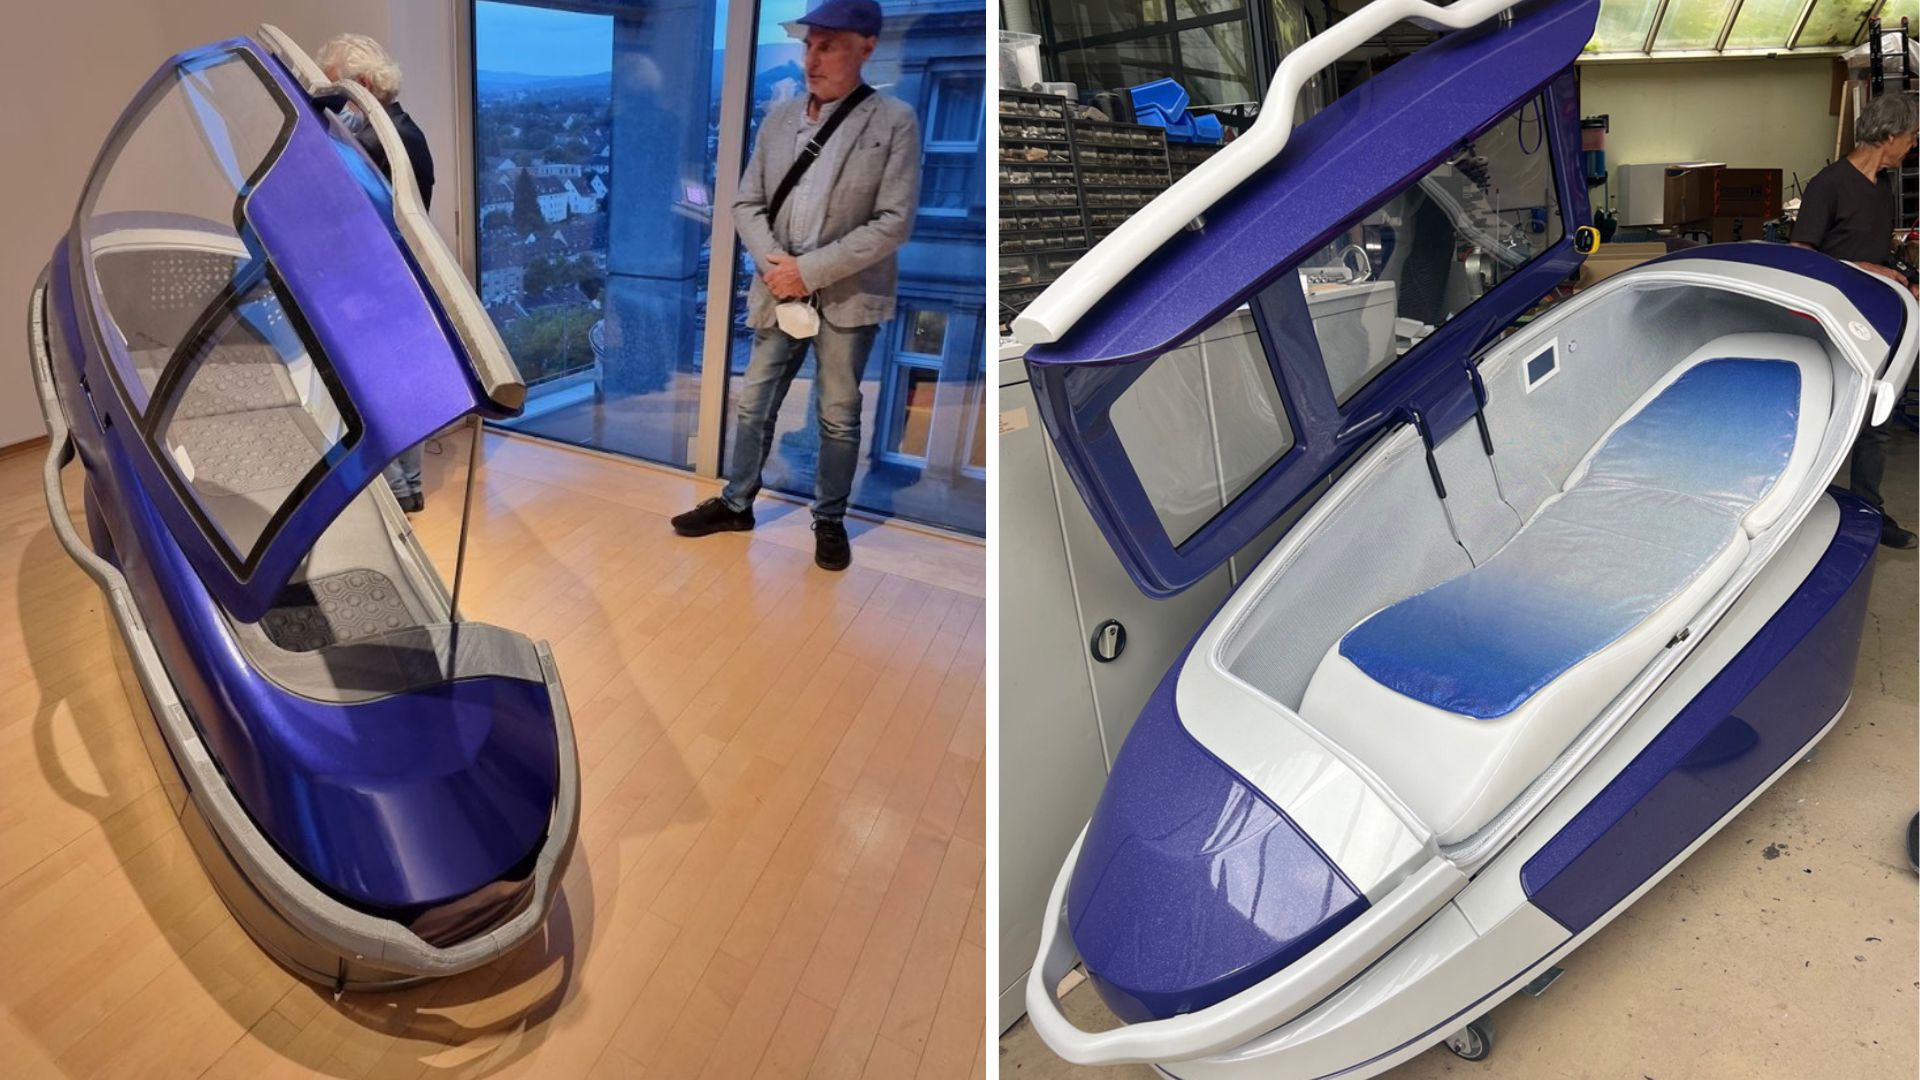 1st space-age-like suicide pod to be used ‘soon’ in Switzerland